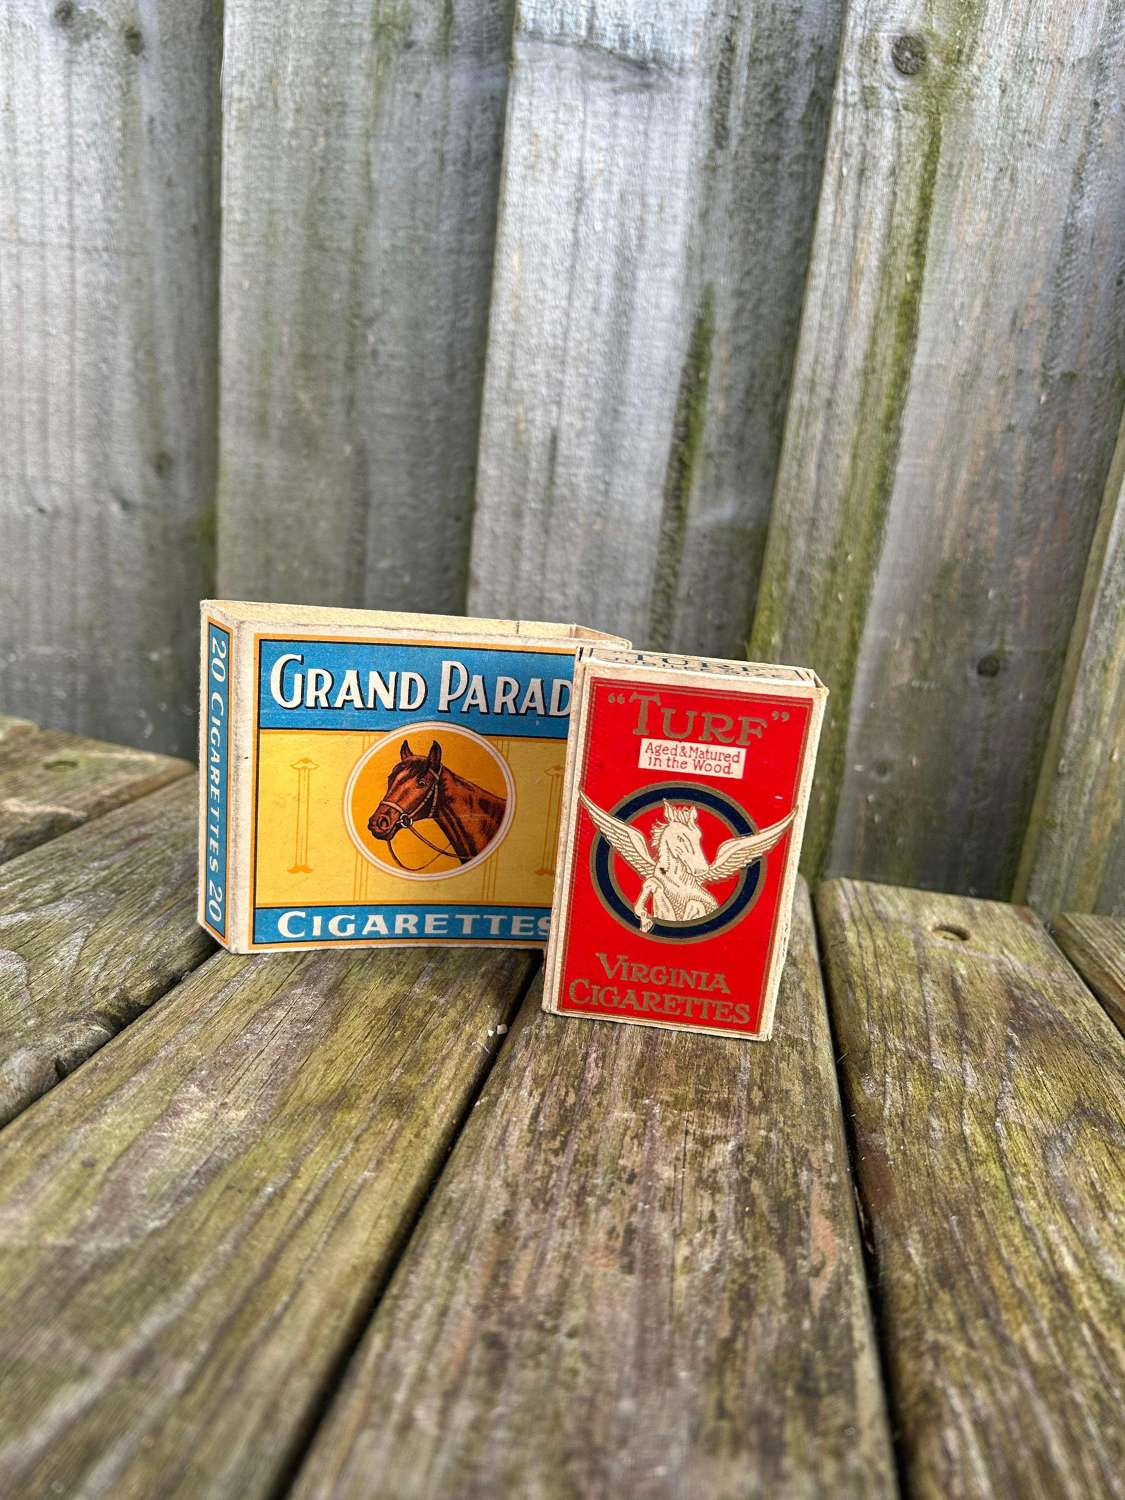 Turf and grand parade cigarette packets